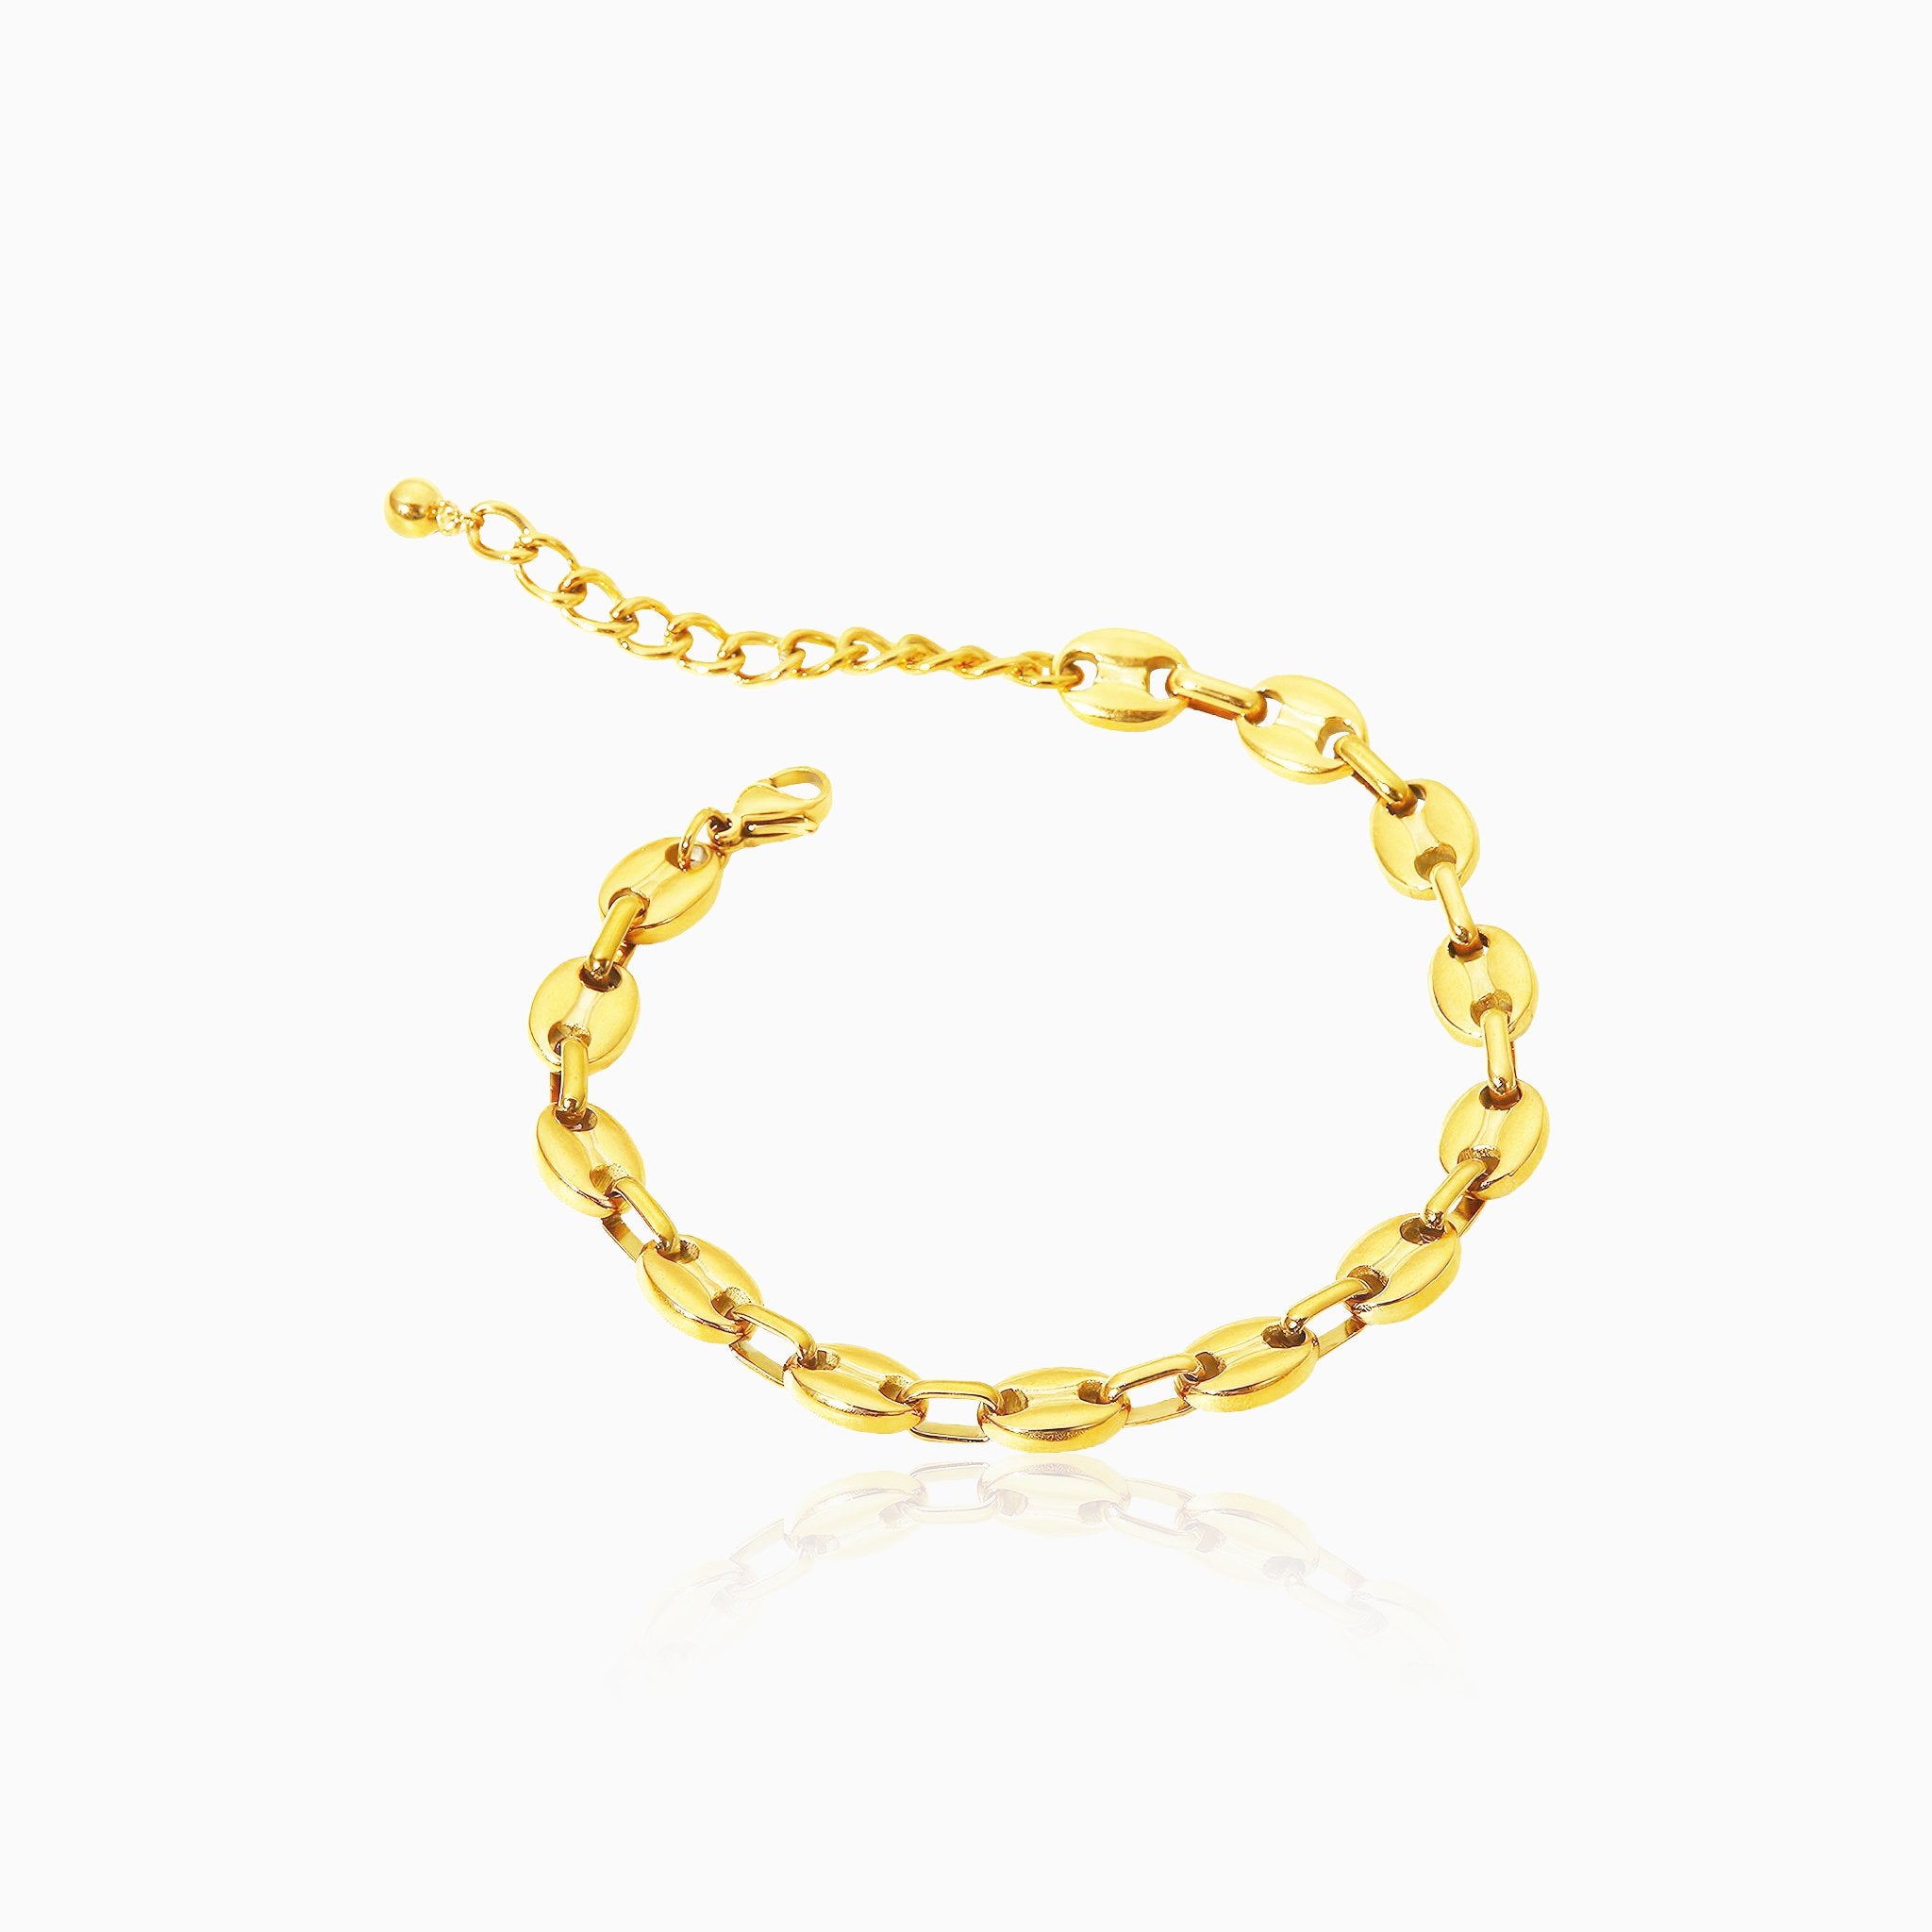 Pig Nose Buckle Anklet - Nobbier - Anklet - 18K Gold And Titanium PVD Coated Jewelry